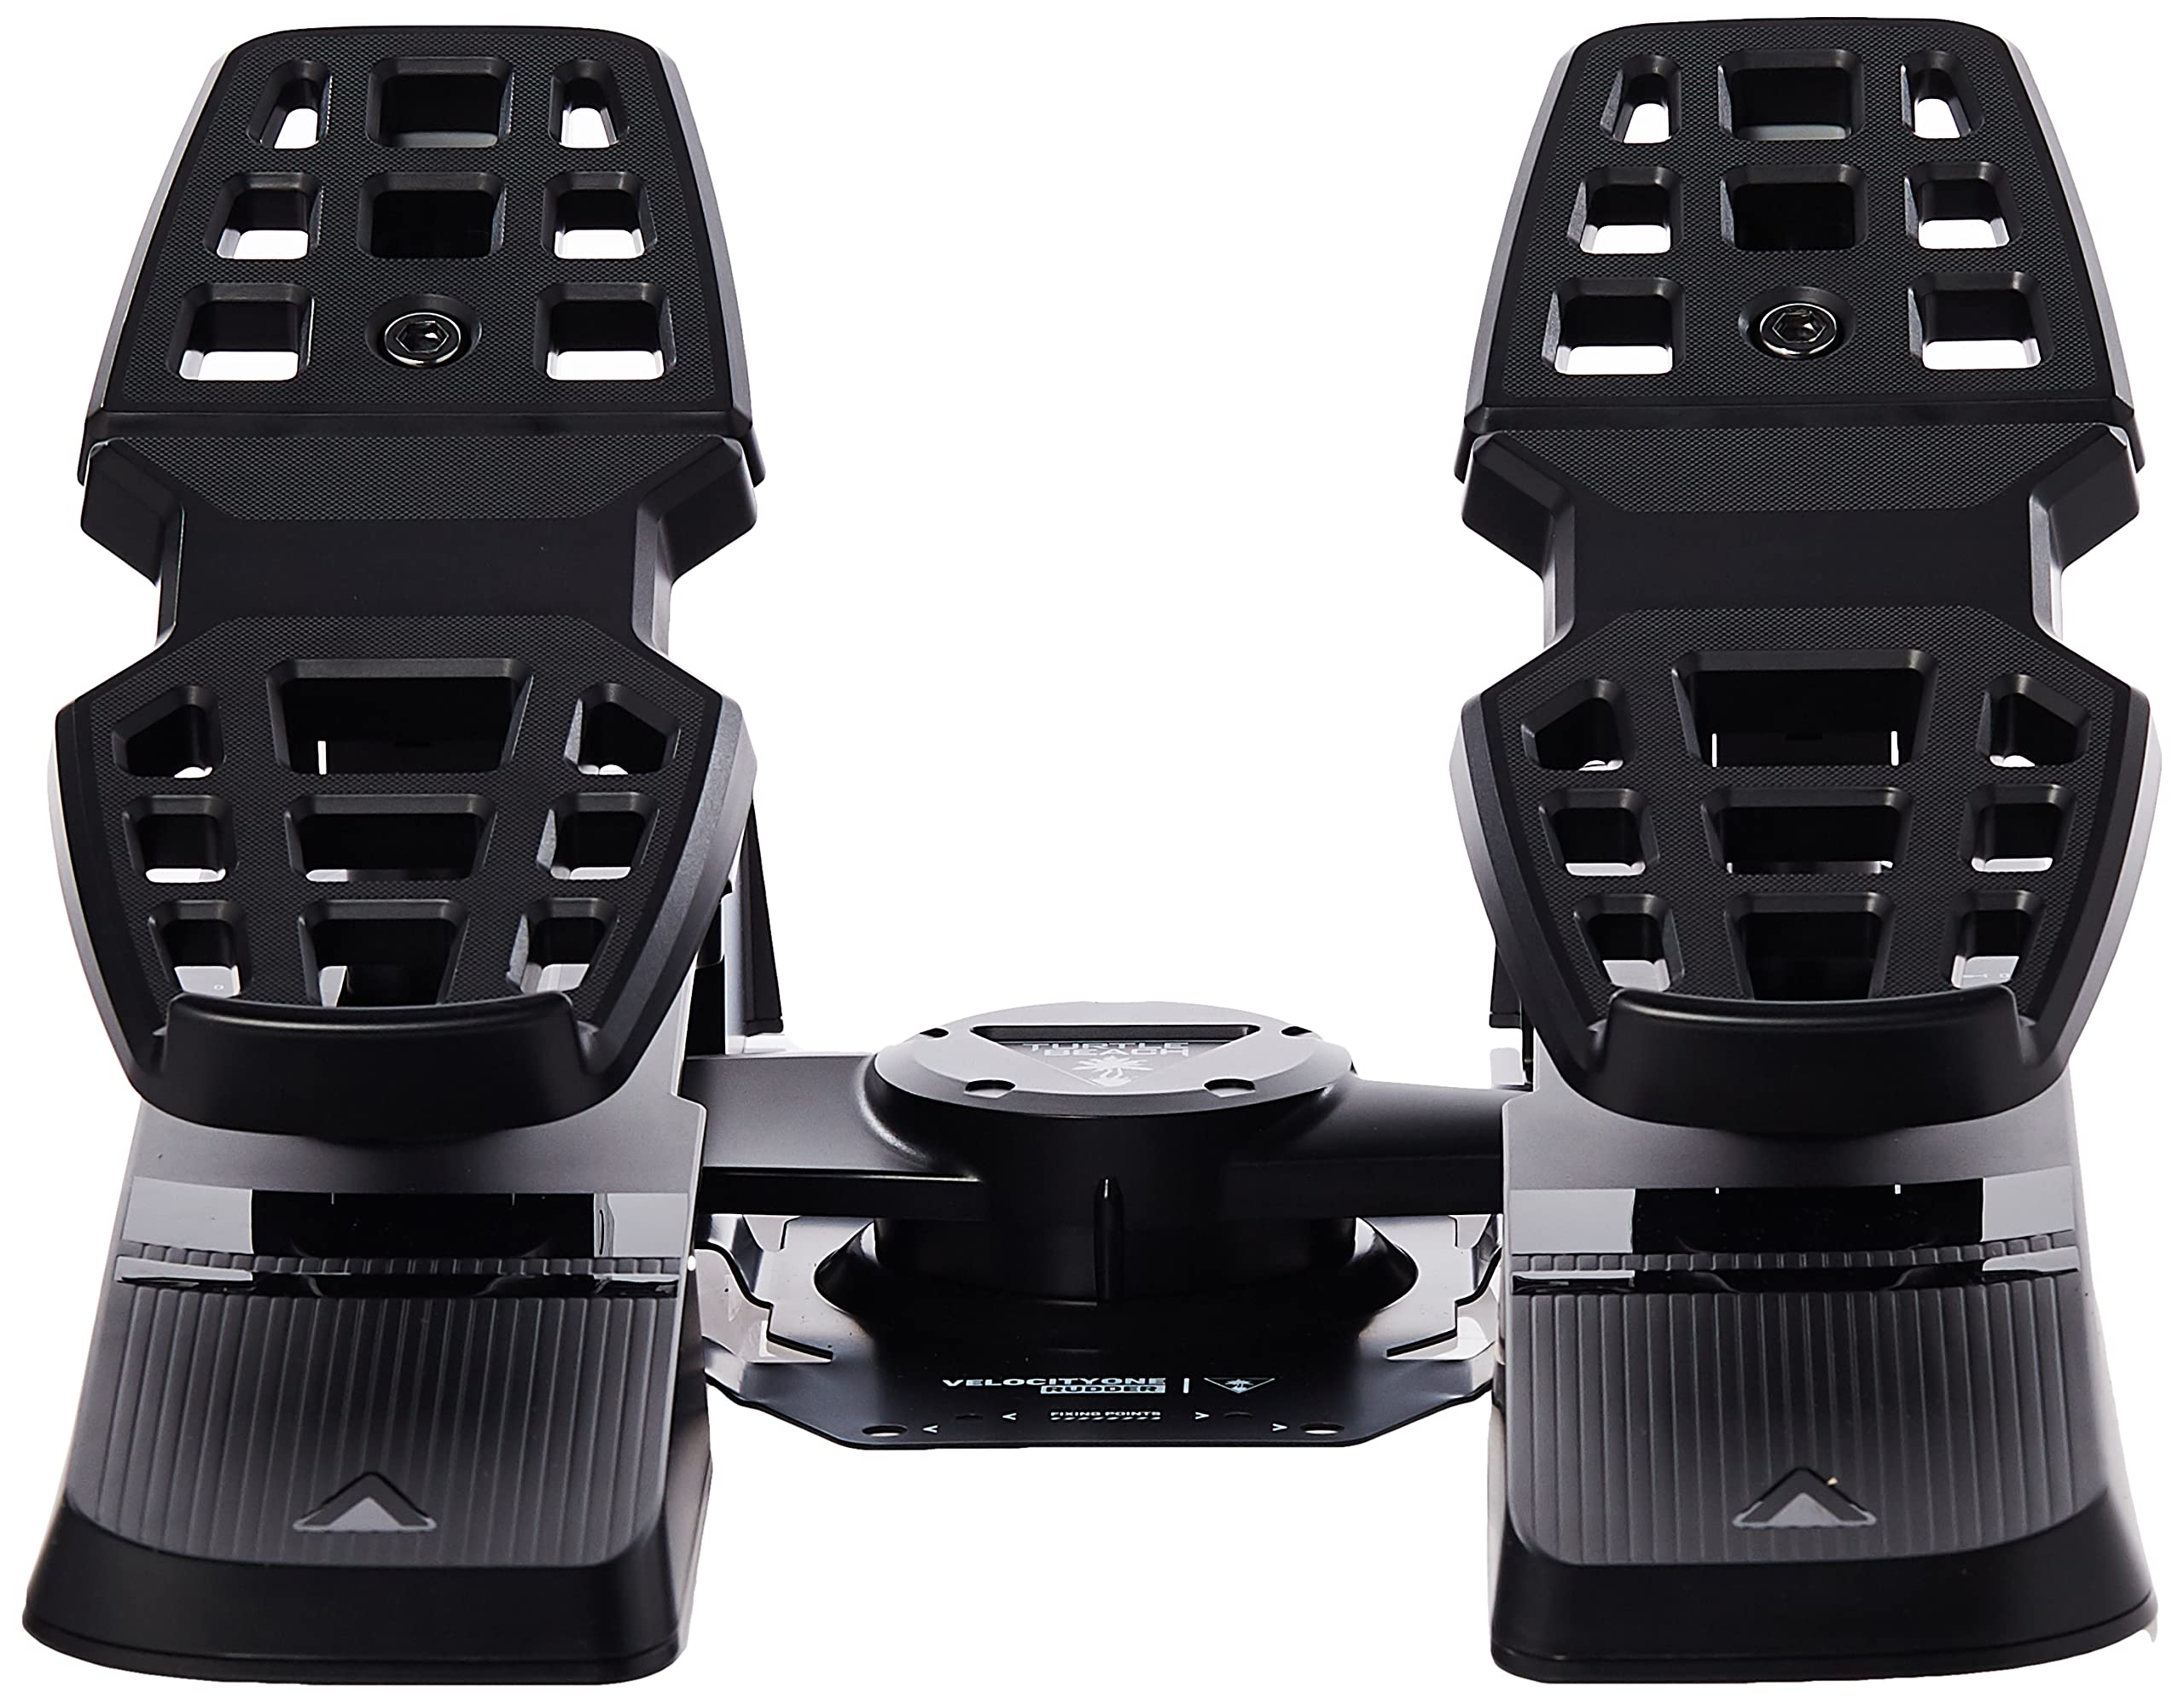 Turtle Beach VelocityOne Universal Rudder Pedals for Windows 10 & 11 PCs, Xbox Series X, Xbox Series S, and Xbox One Featuring Smooth Rudder Axis, Adjustable Brakes and Pedal Width – Black